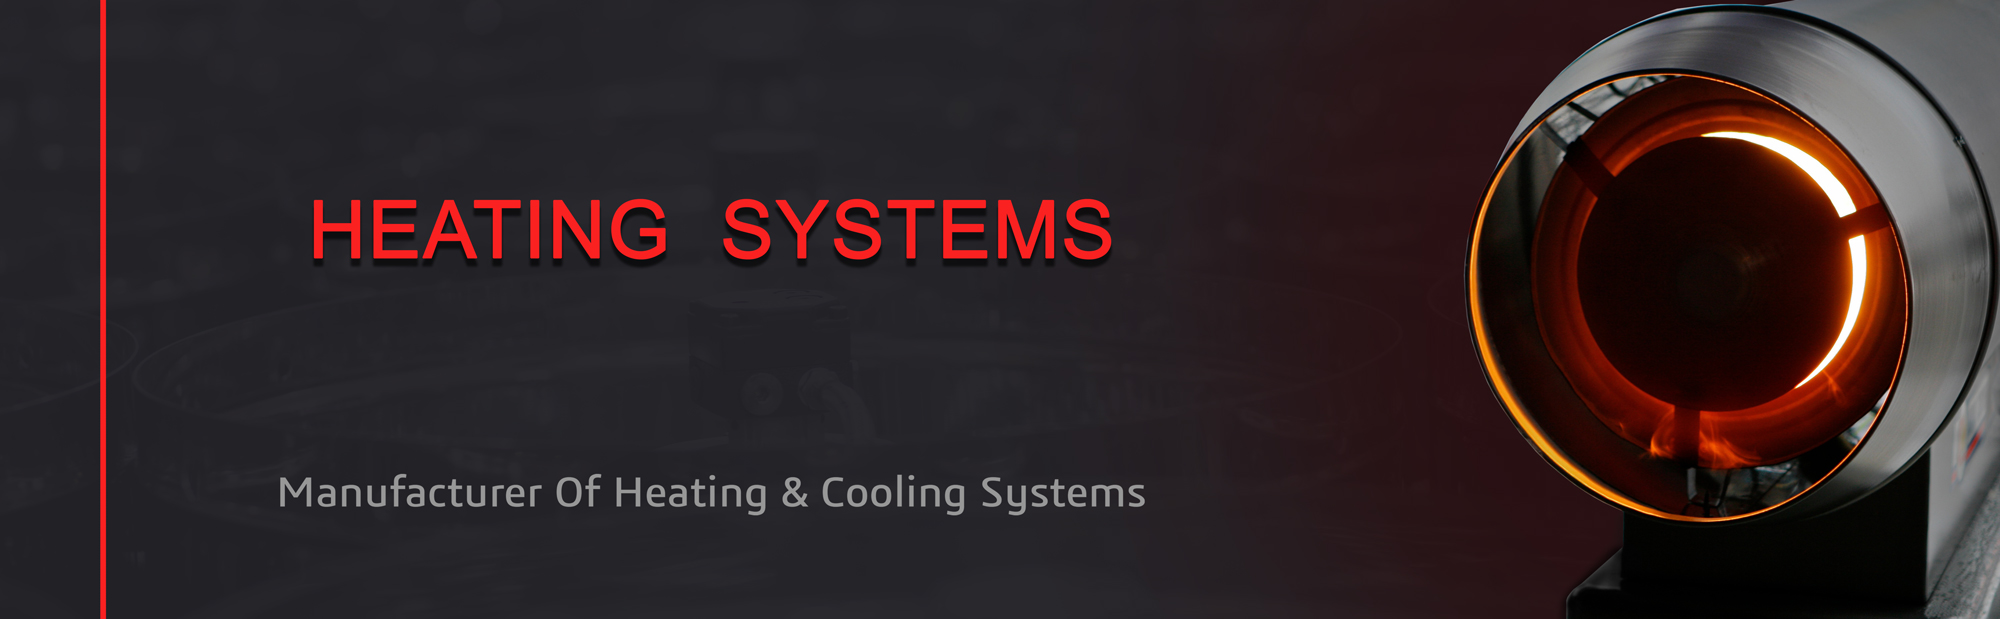  Heating Systems